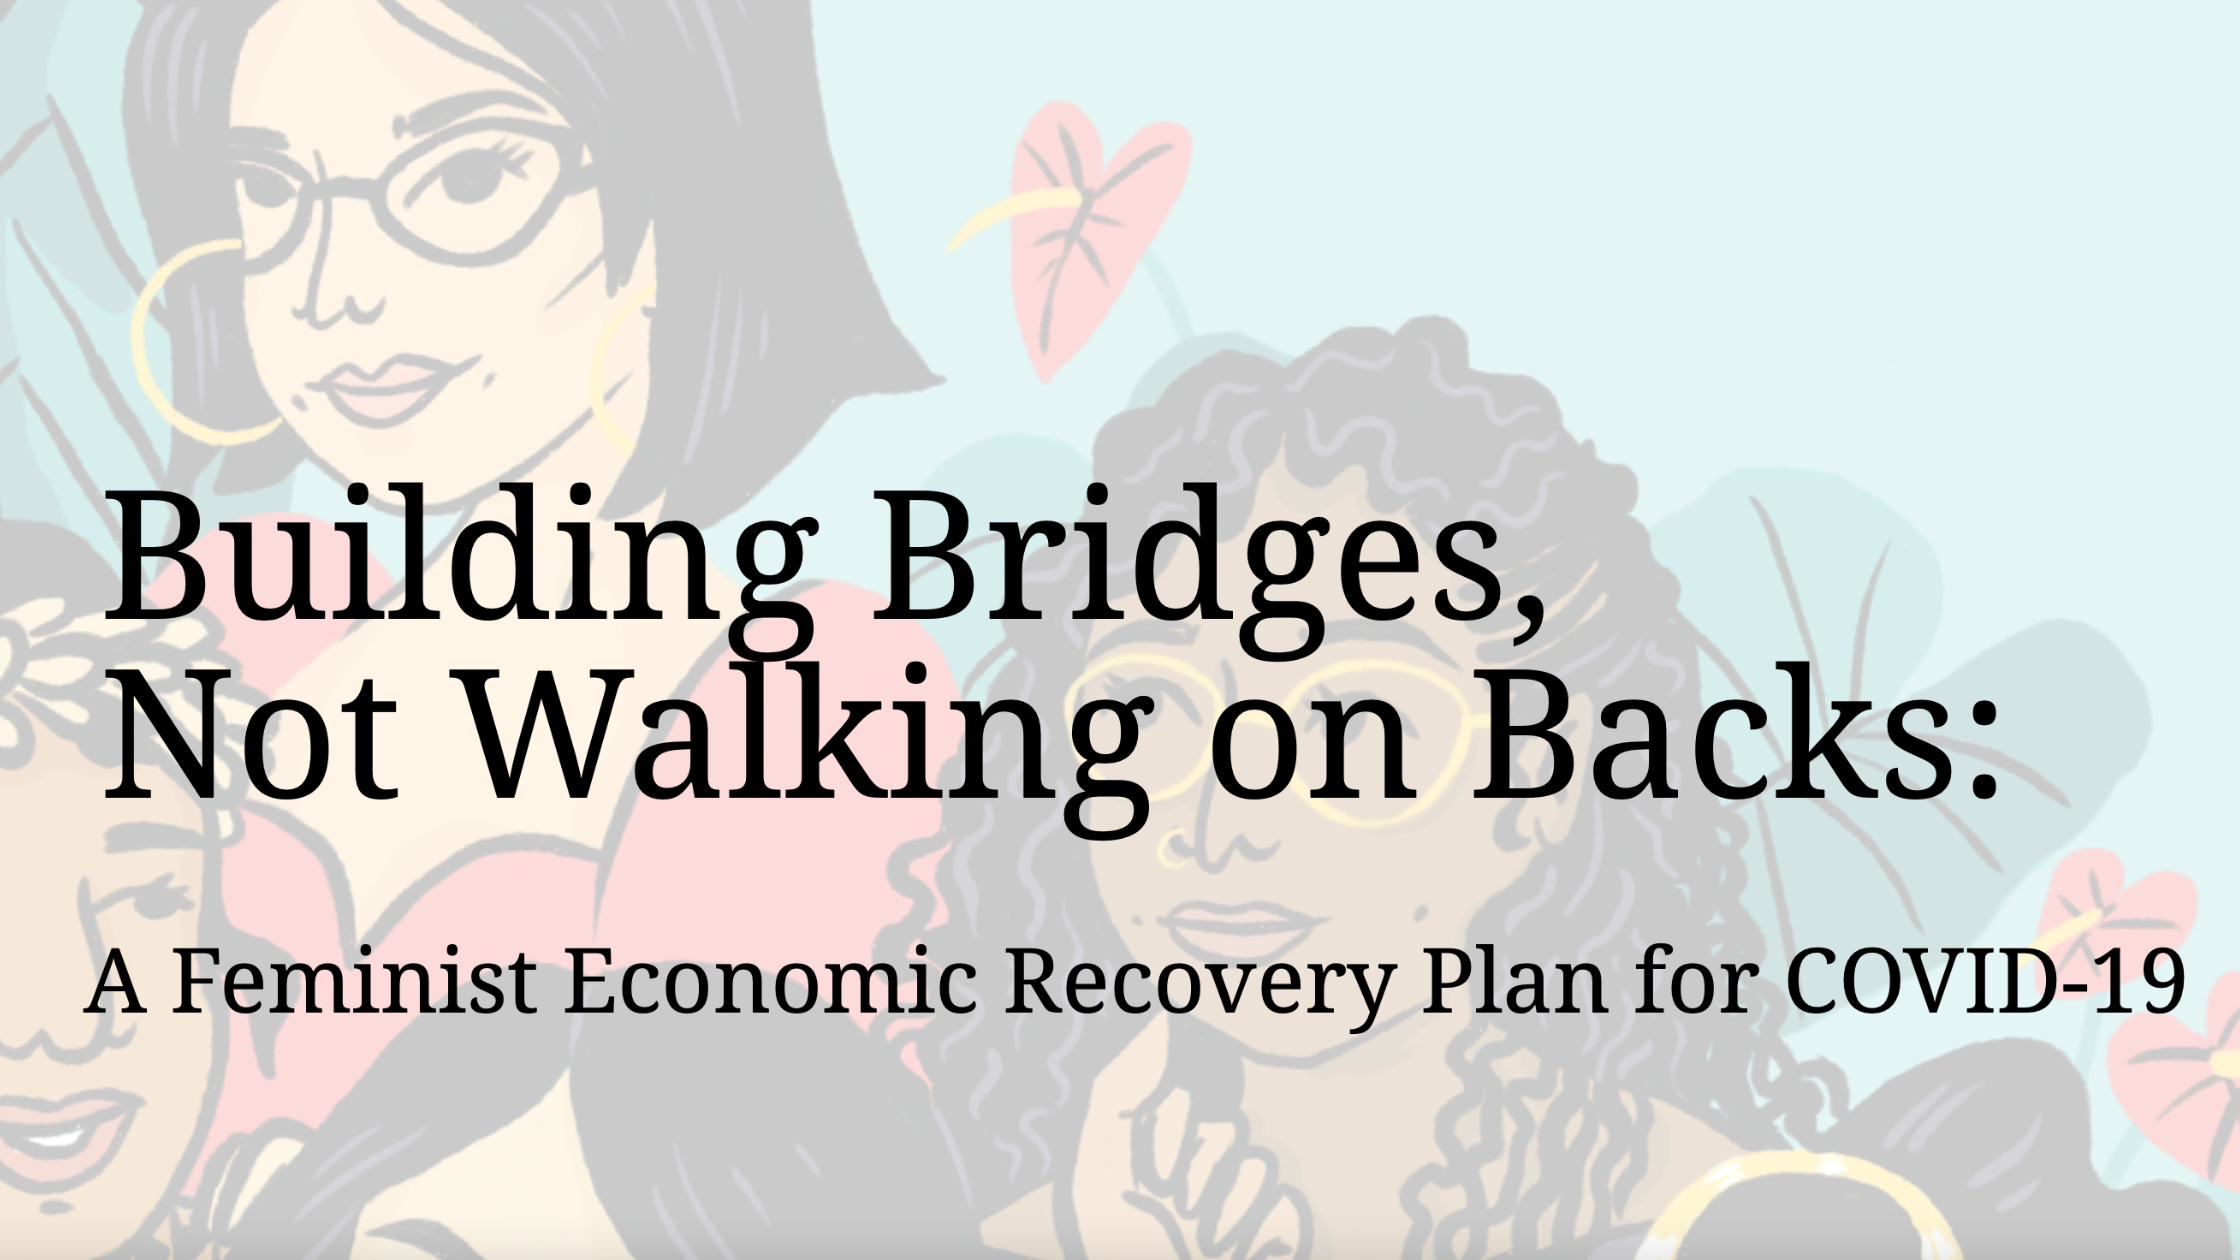  Building Bridges, Not Walking on Backs: A Feminist Economic Recovery Plan for COVID-19